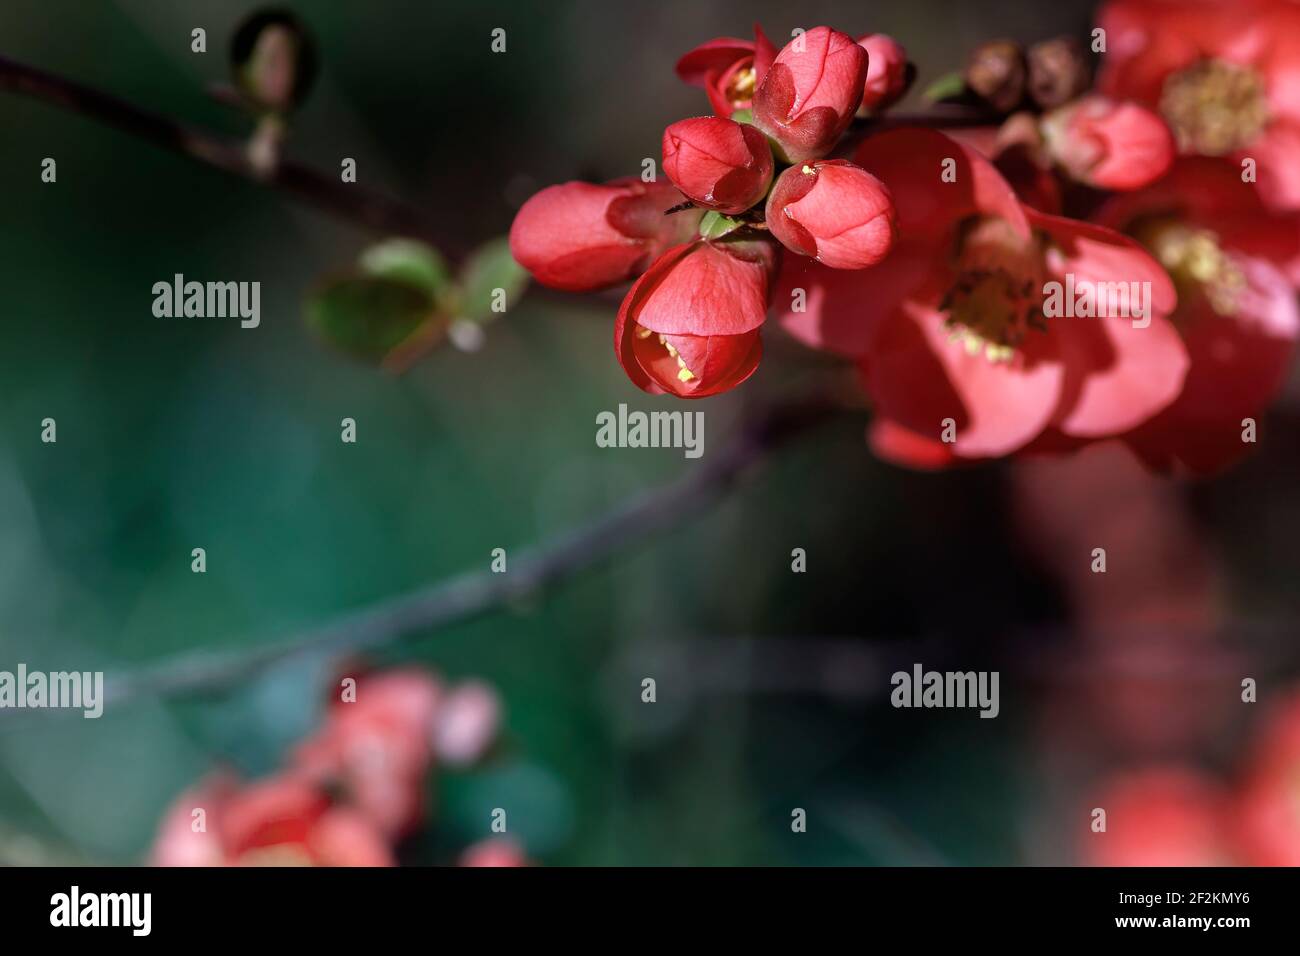 Detail of blossoming chaenomeles japonica pale red flowers Stock Photo